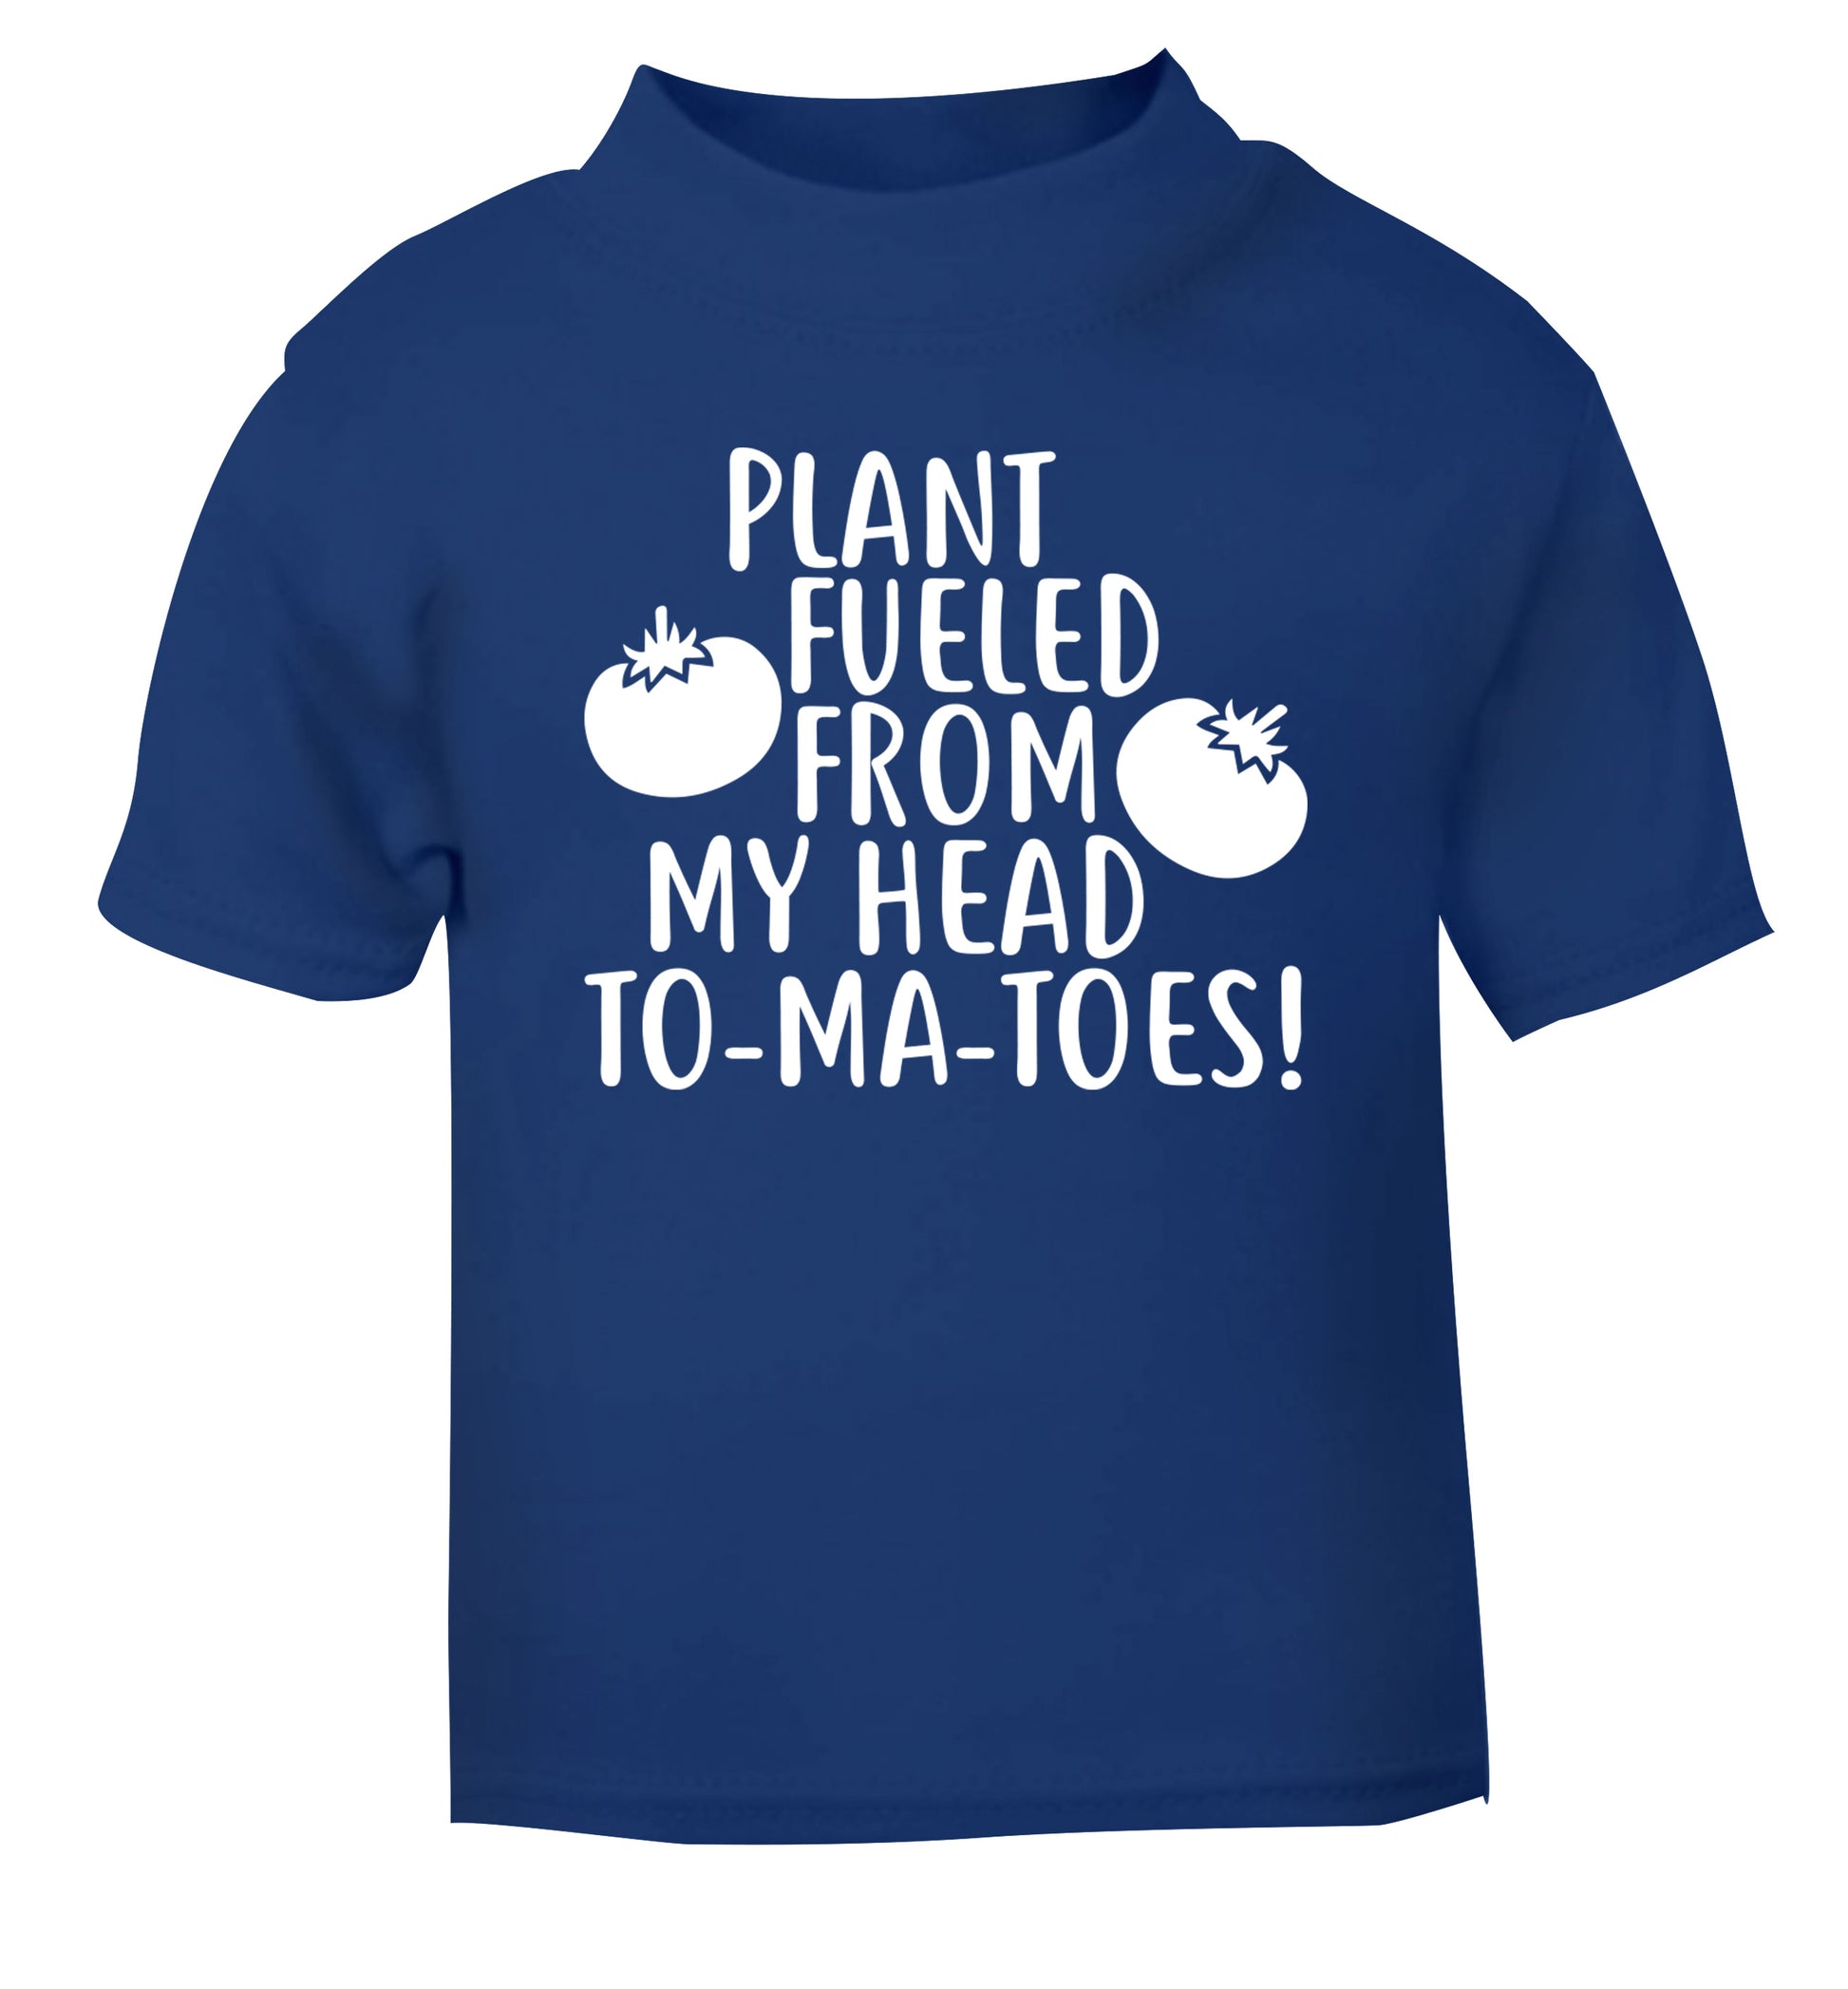 Plant fueled from my head to-ma-toes blue Baby Toddler Tshirt 2 Years